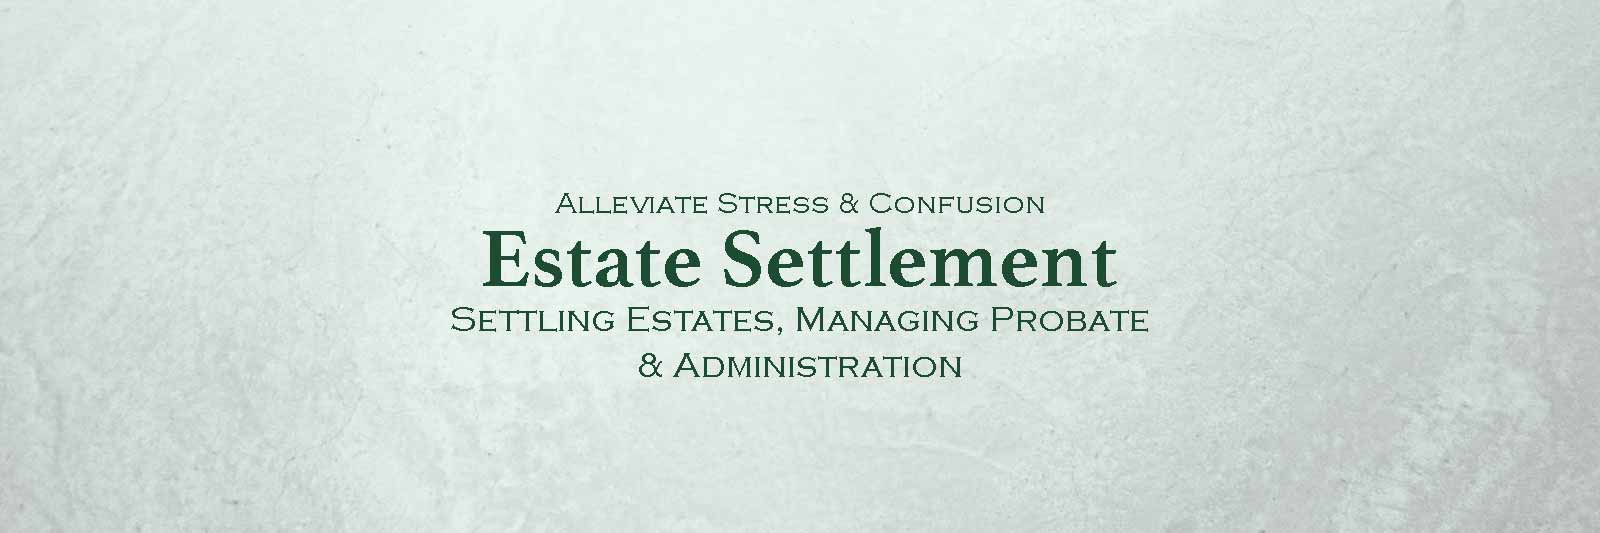 Alleviate Stress And Confusion: Estate Settlement; Settling estates, managing probate and administration